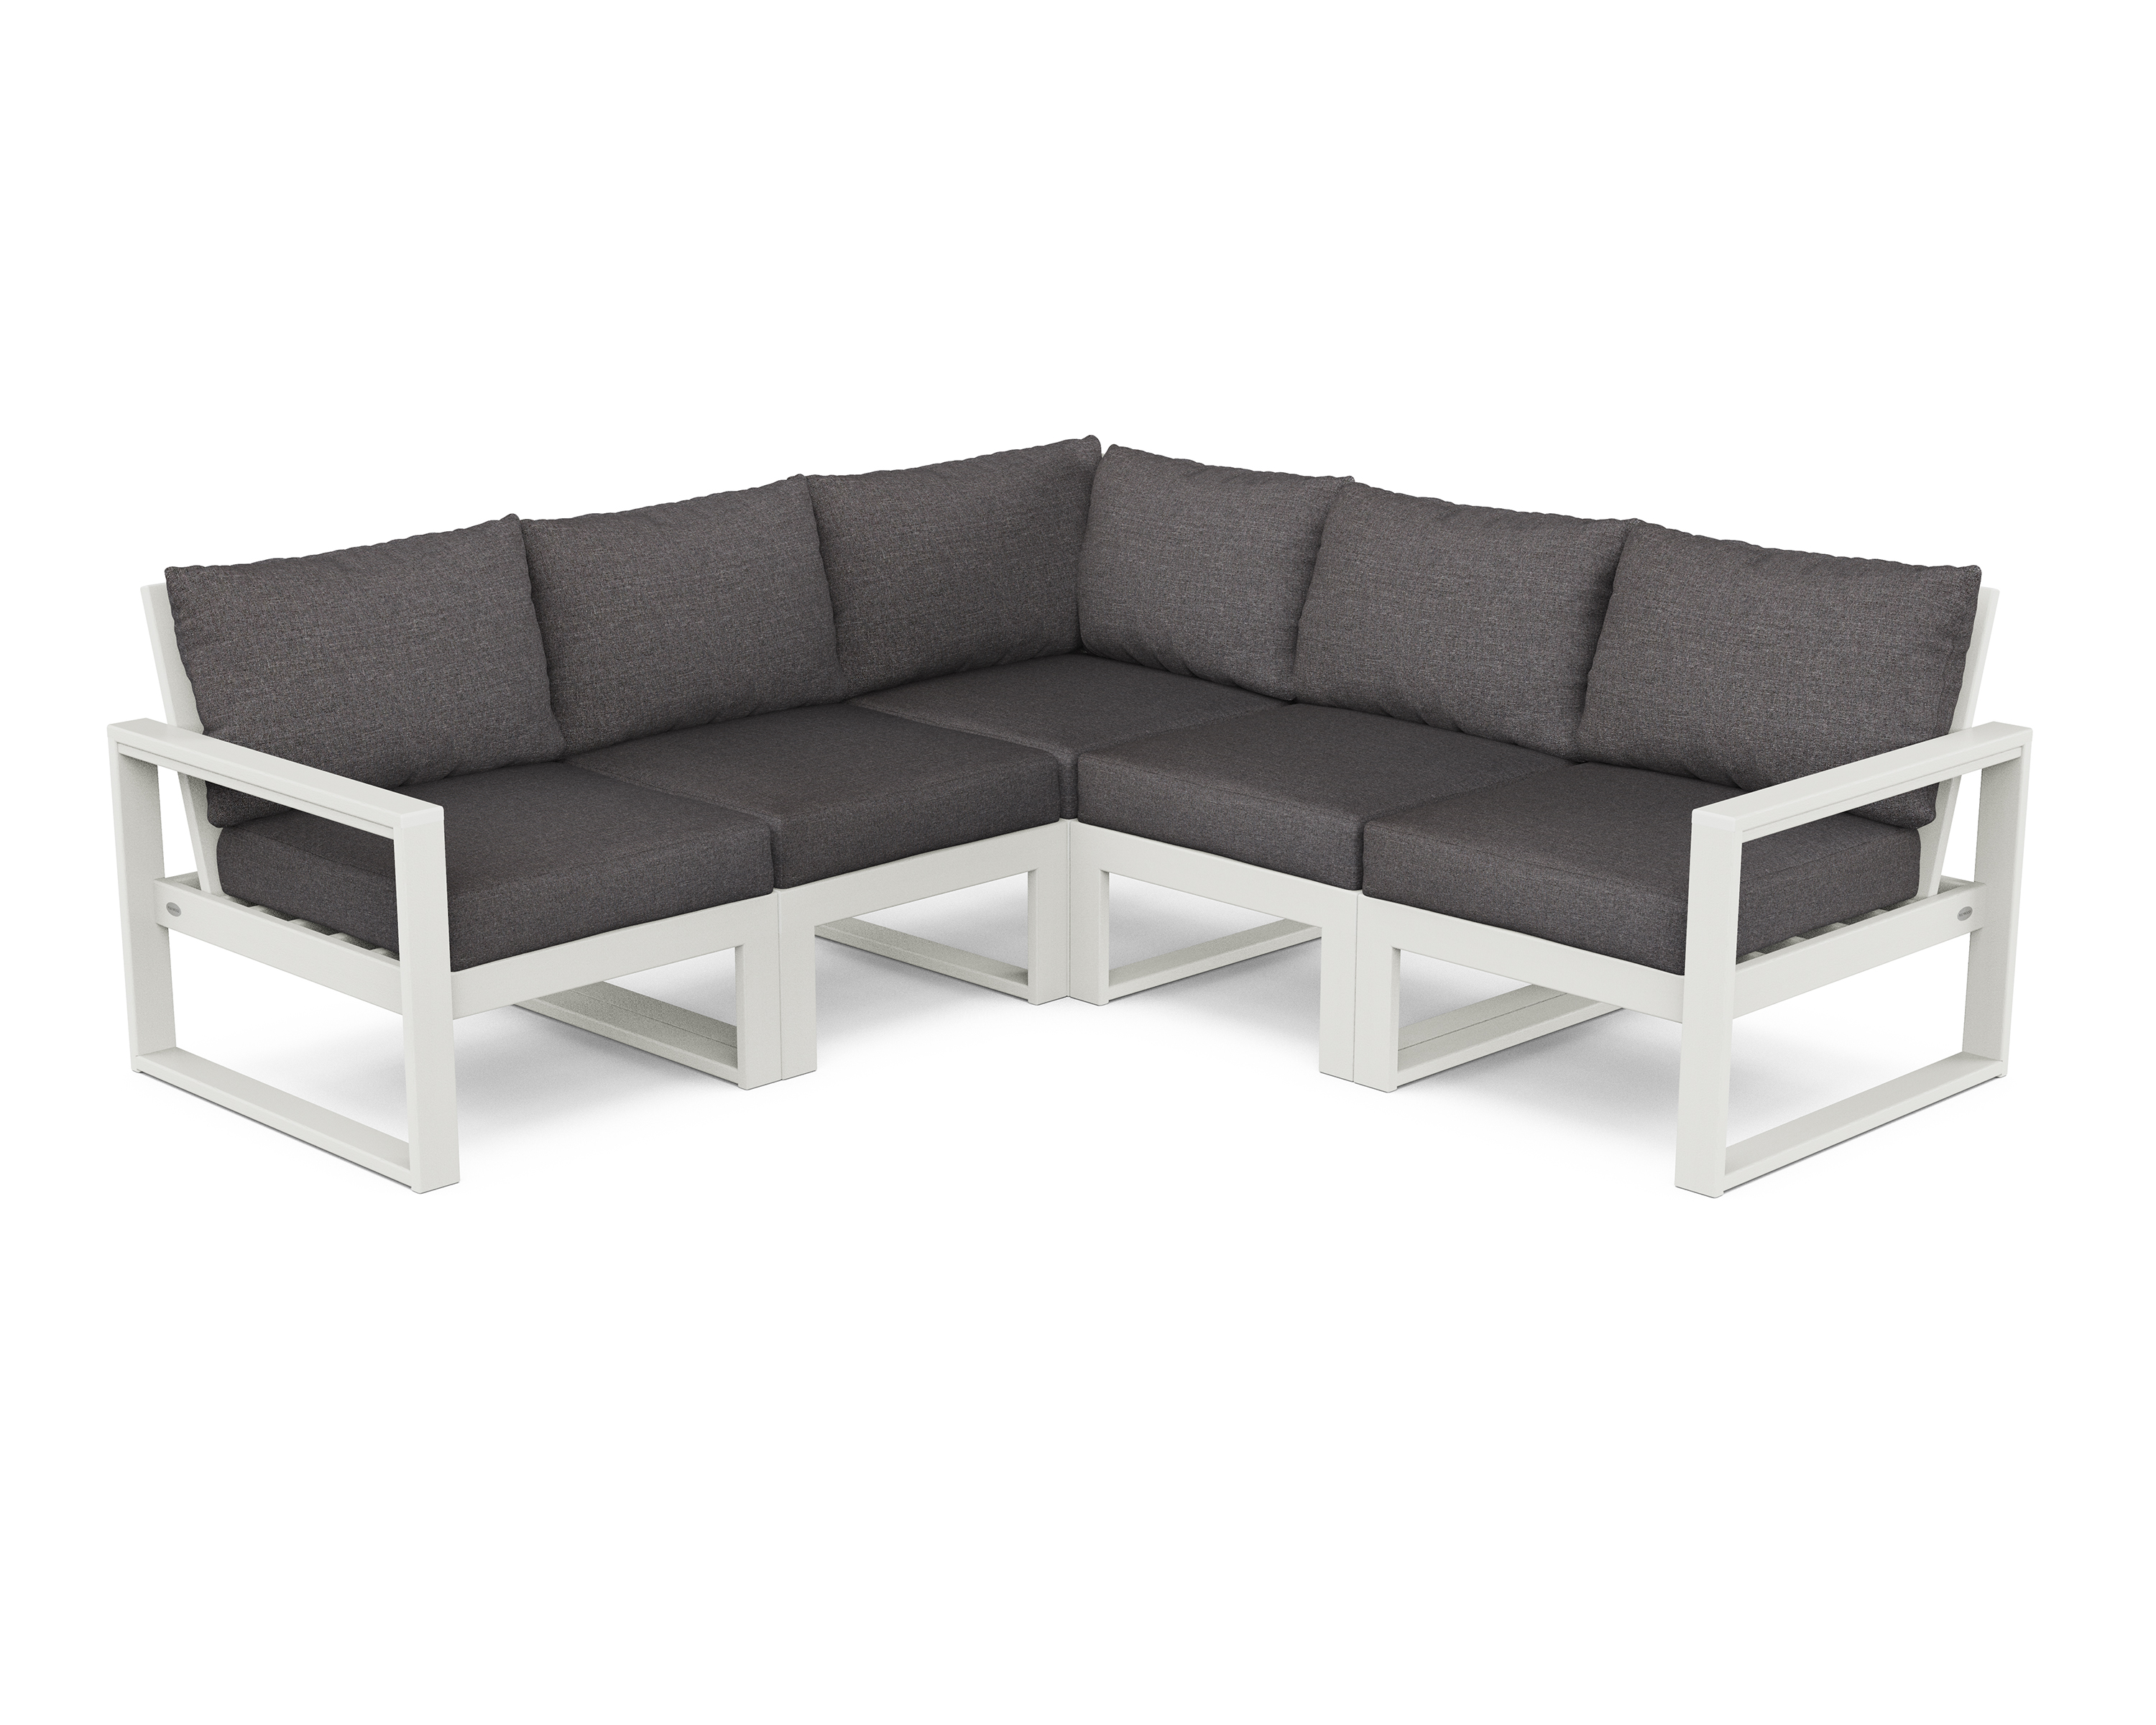 edge 5-piece modular deep seating set in vintage white / ash charcoal product image